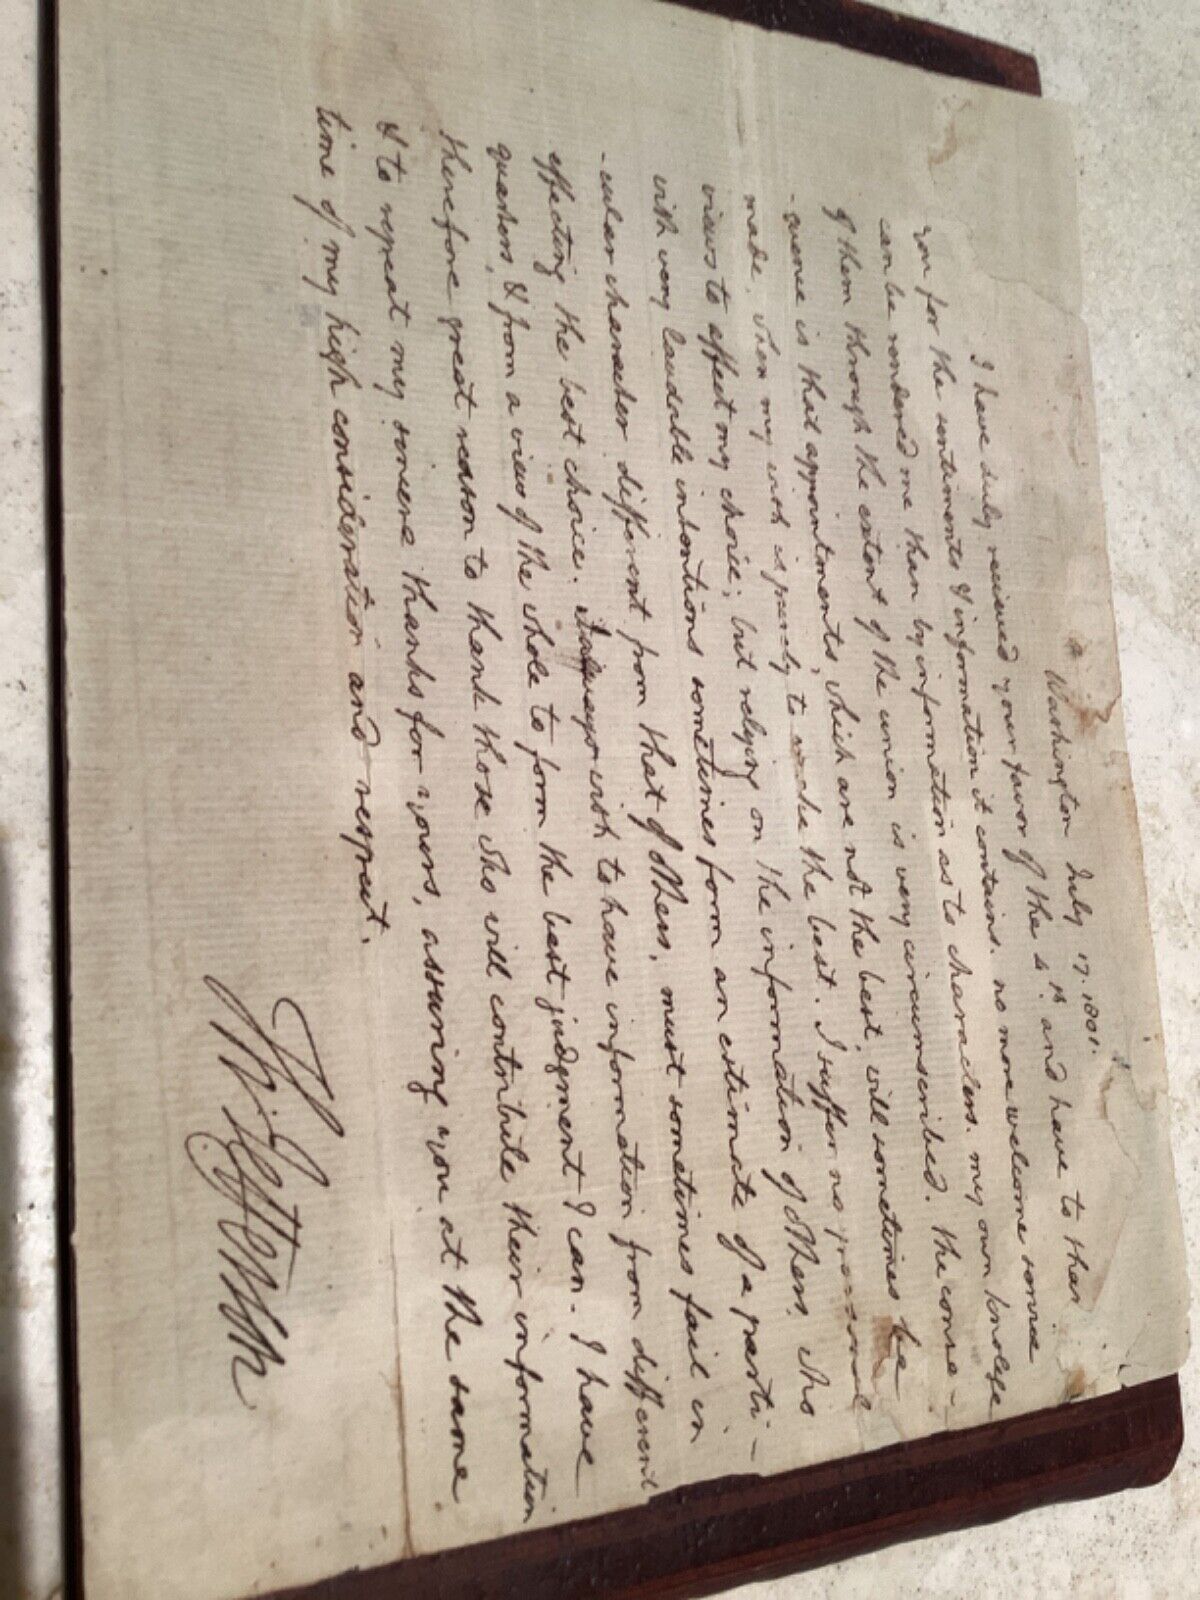 Thomas Jefferson, 1801 Important Autographed Letter Signed - Pres. Appointments 